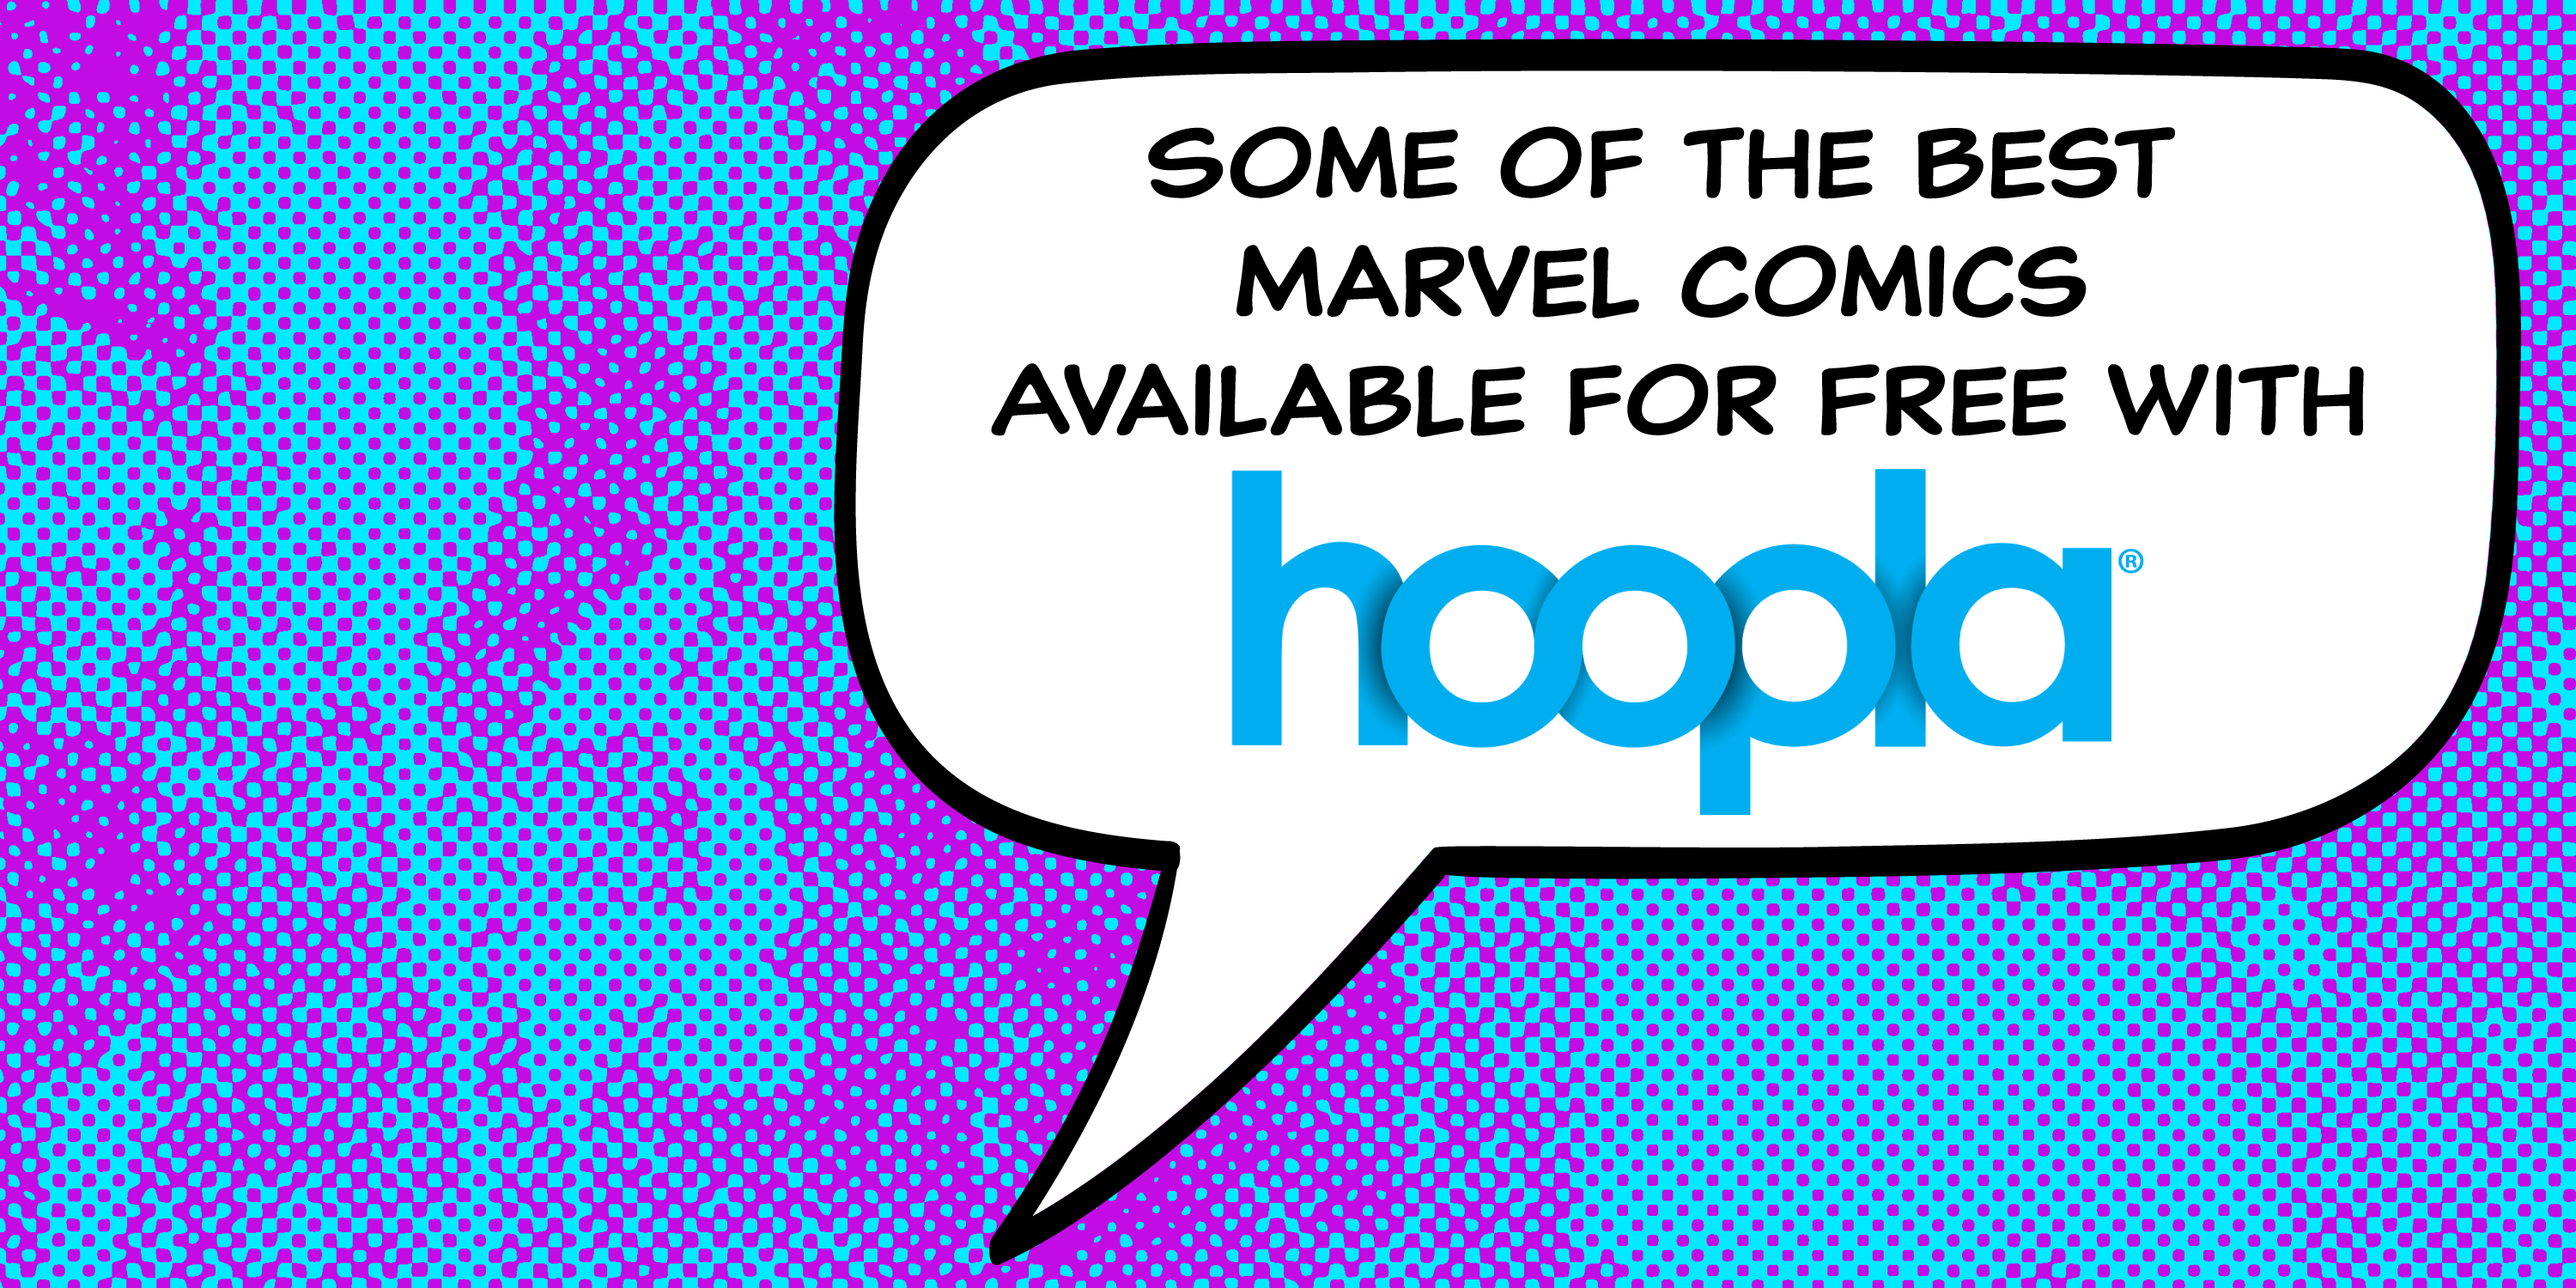 Some of the Best Marvel Comics Available for Free With Hoopla